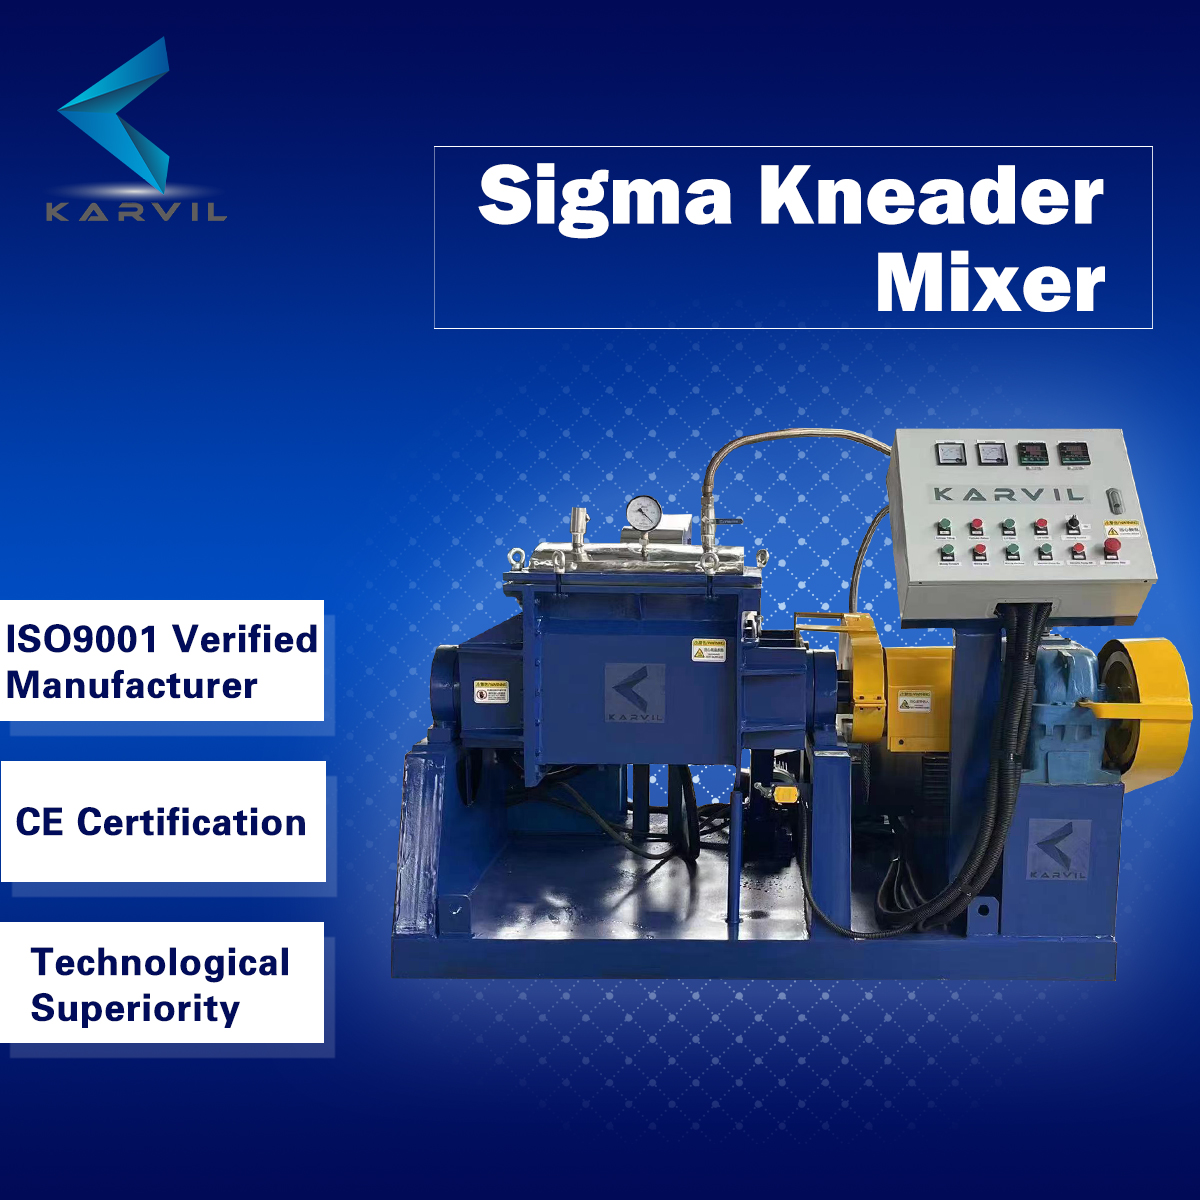 A New Sigma Kneader is Ready to be Sent to Türkiye